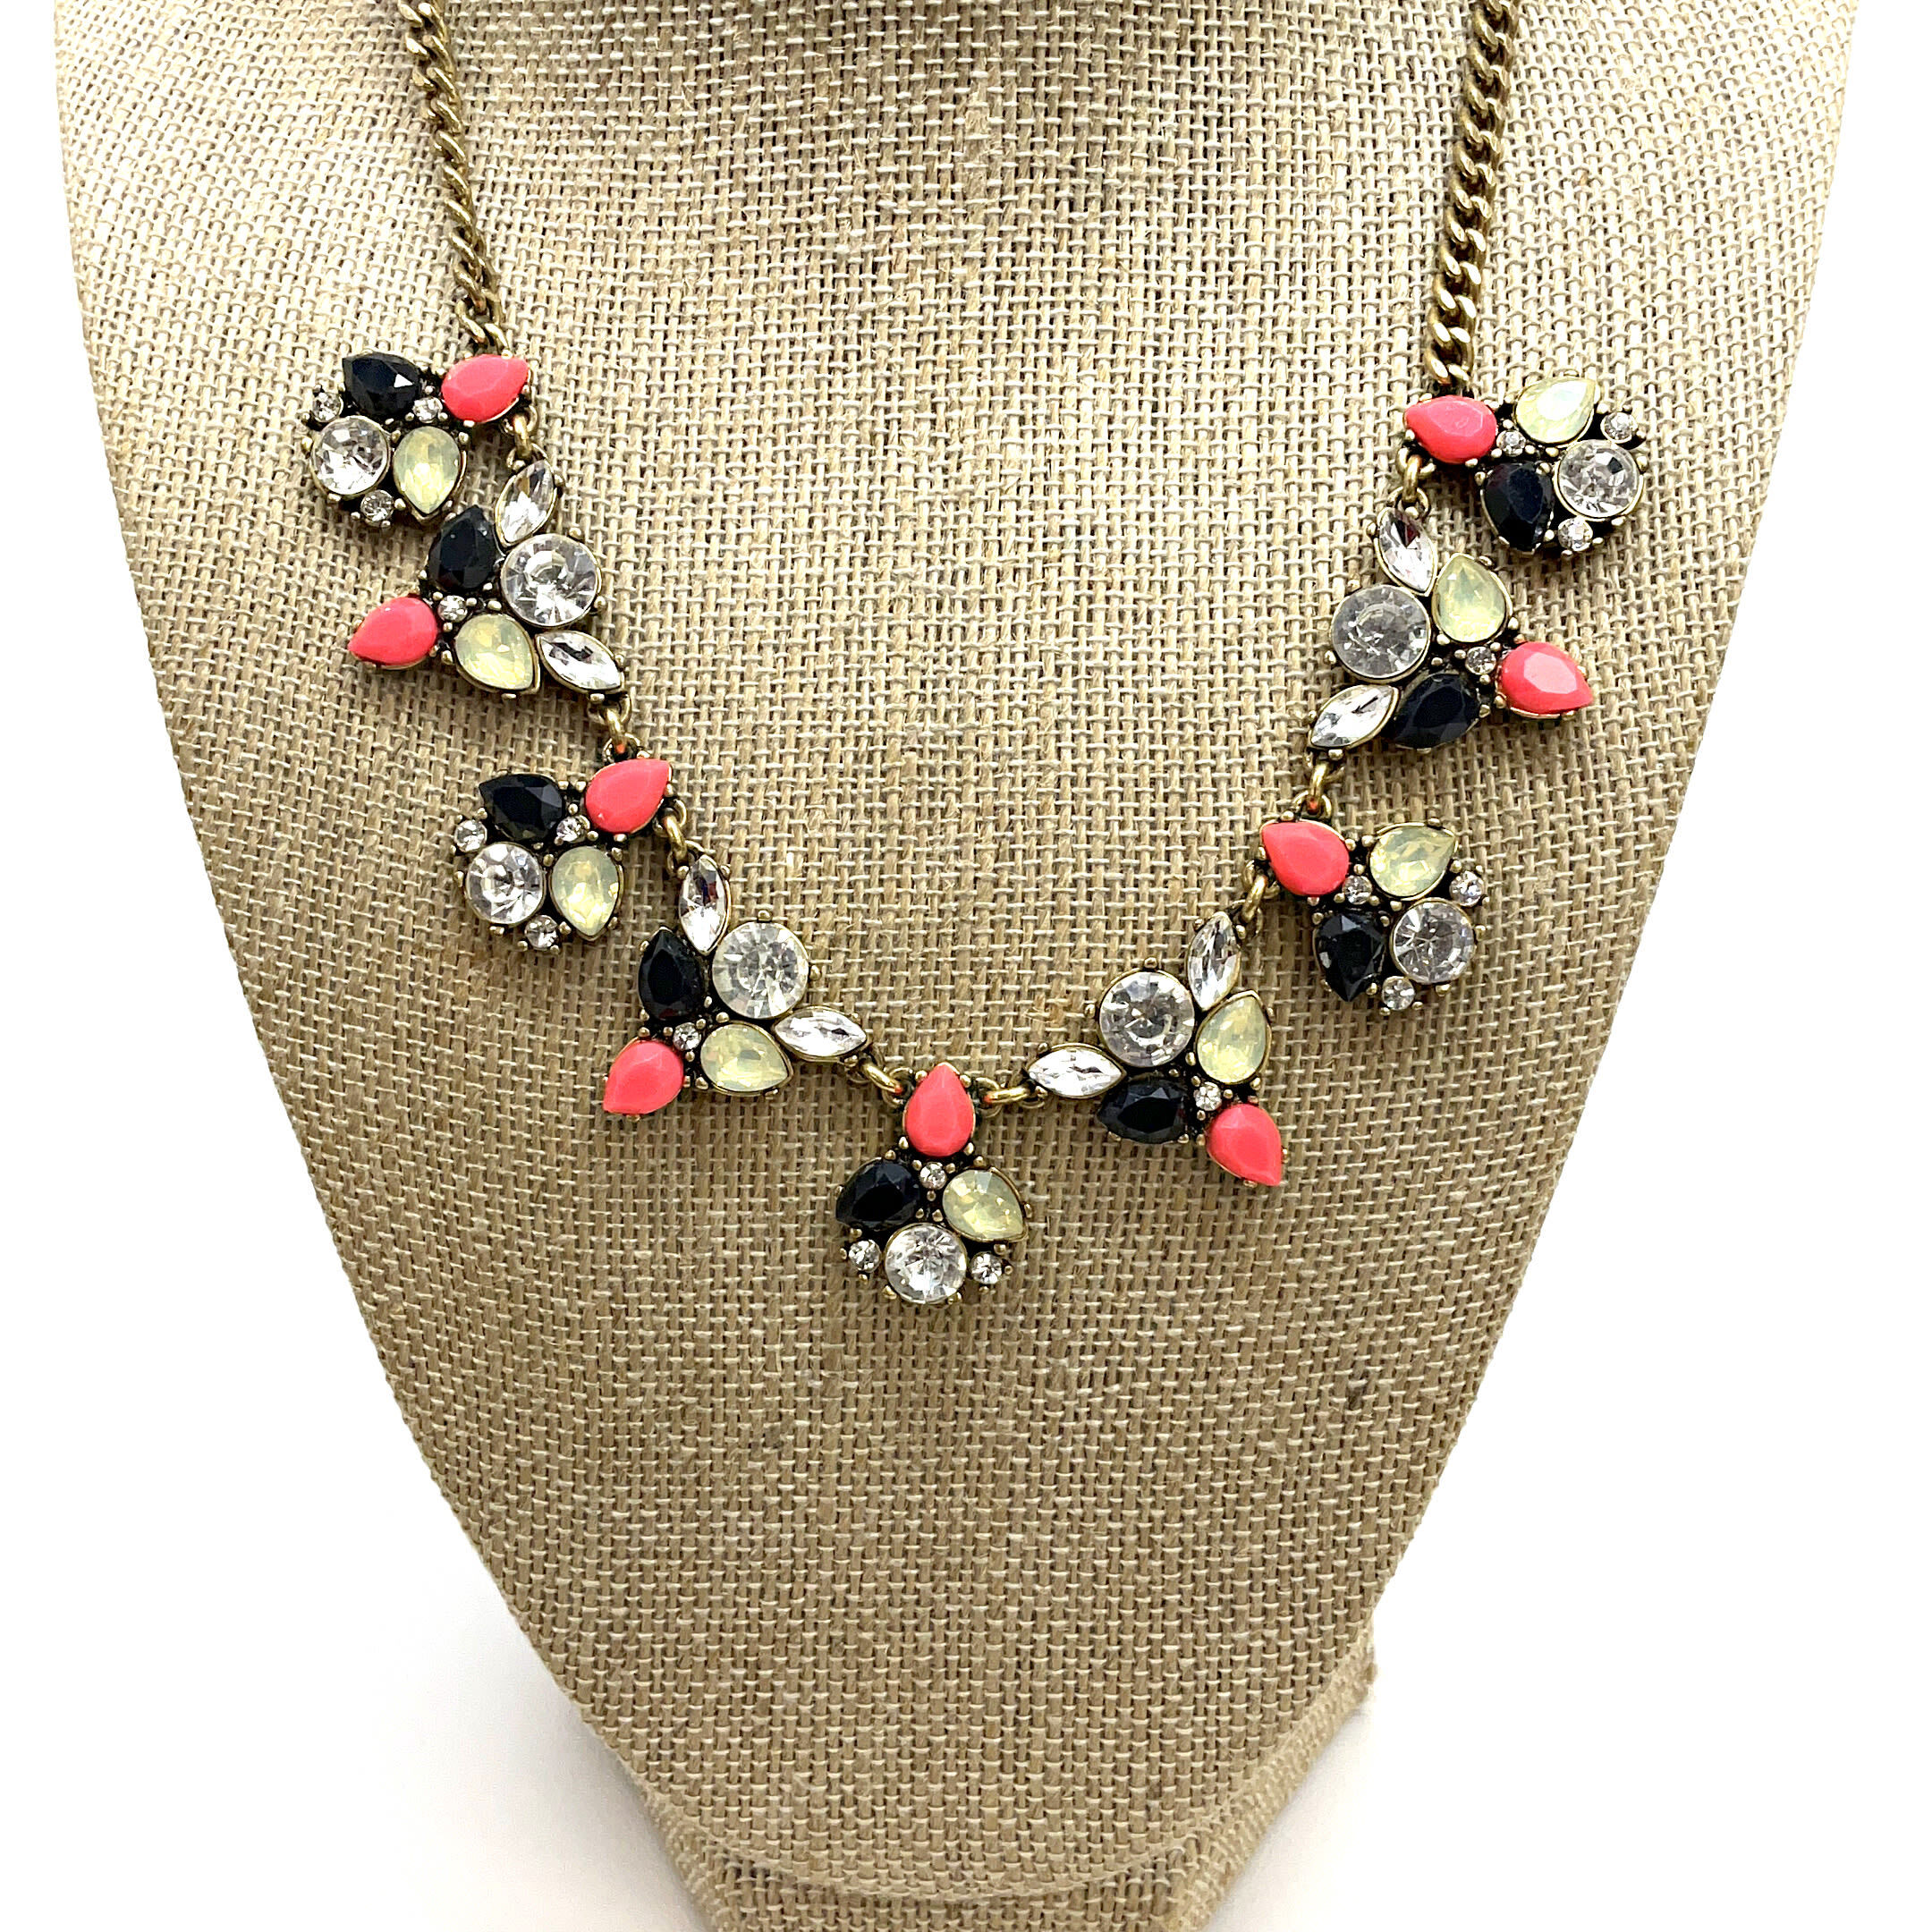 Scaasi Multi Color Rhinestone and Pearl Necklace - Ruby Lane